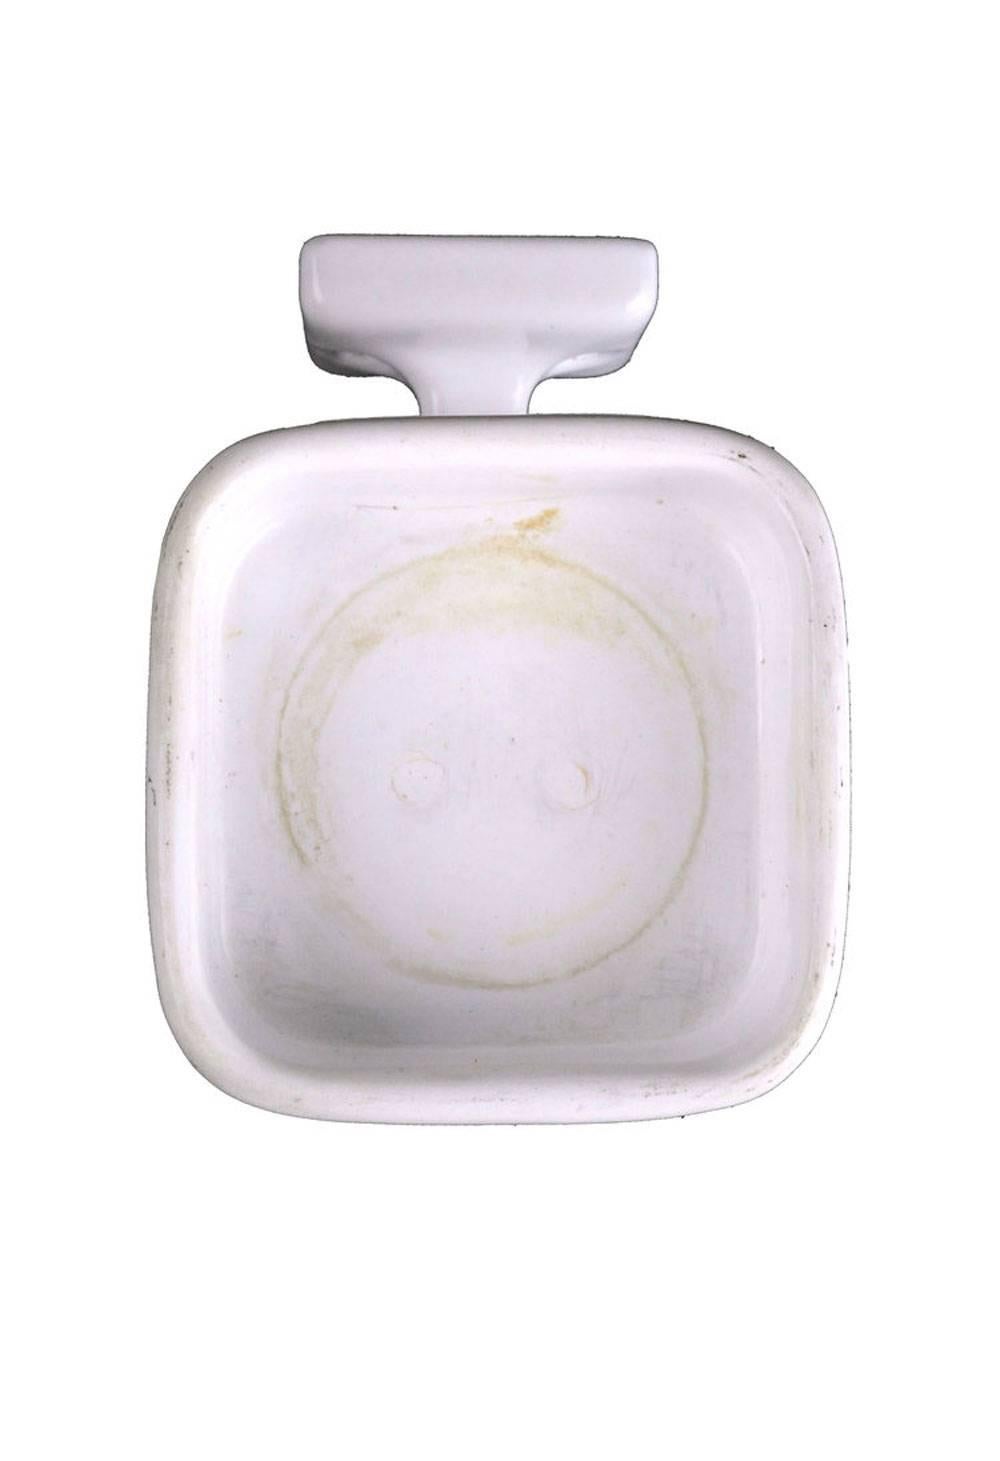 American White Enamel Cup Holder or Soap Dish, circa 1930